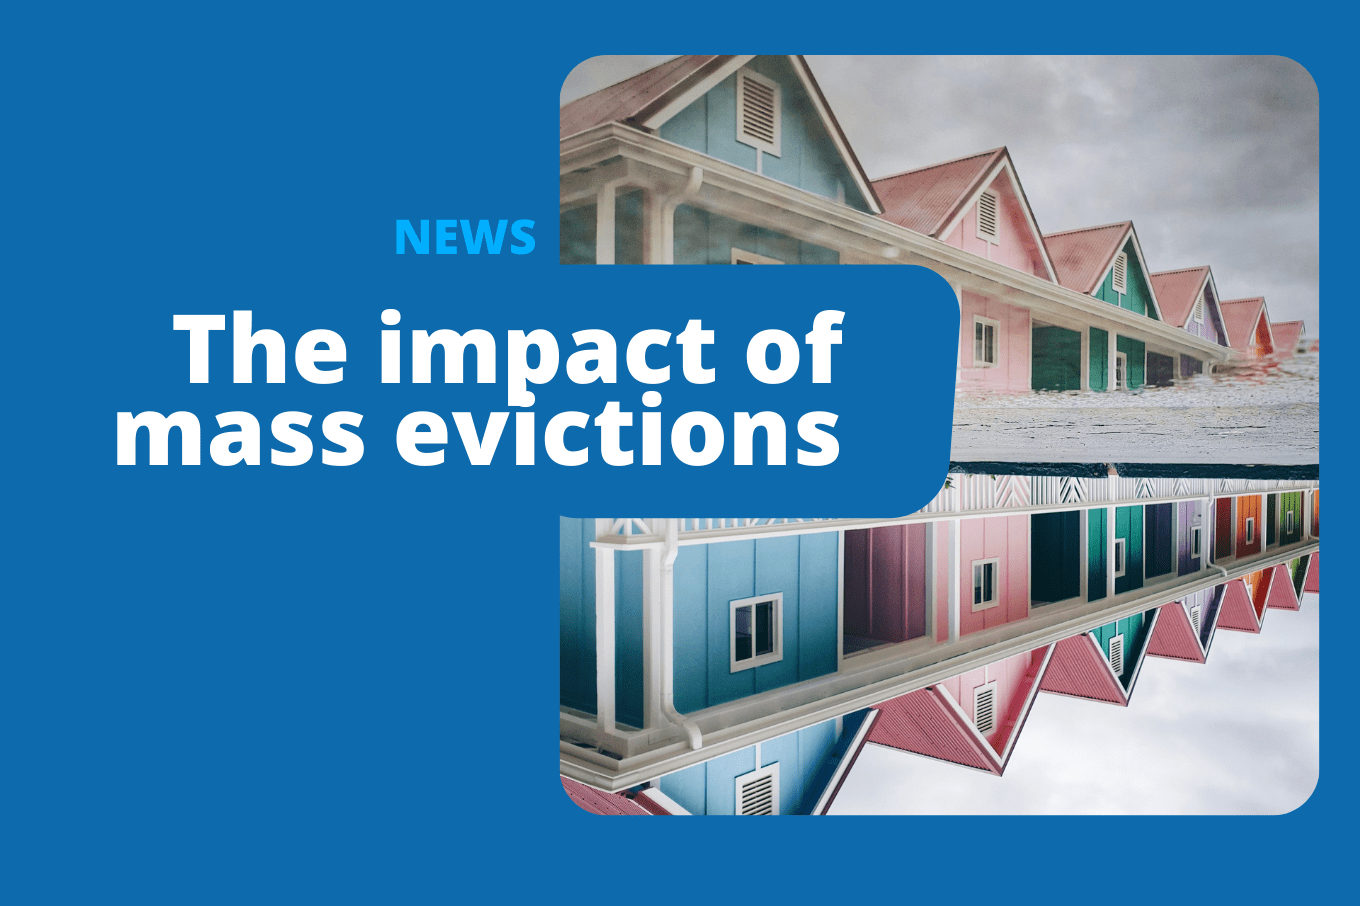 What Effect Will Mass Evictions Have on the Housing Market?